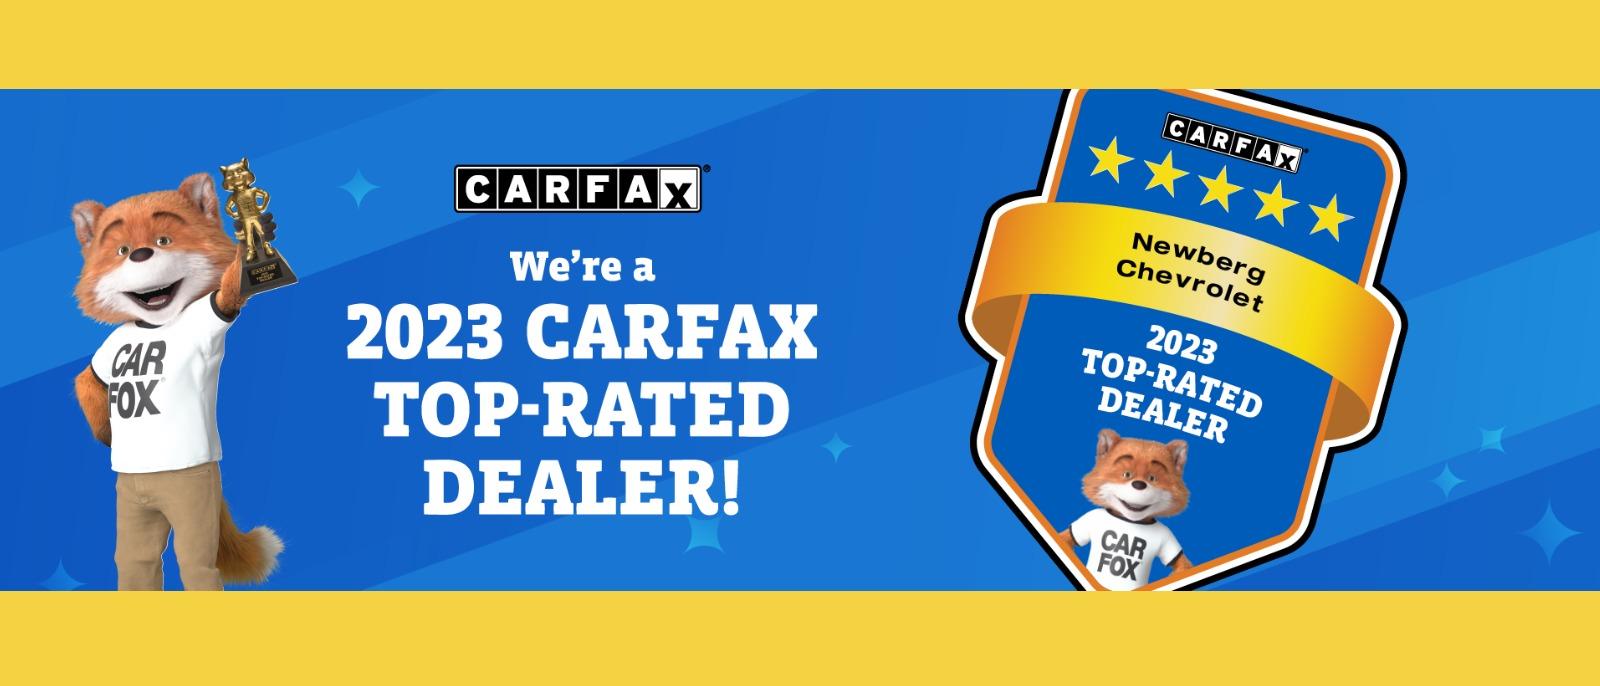 WE'RE A CARFAX 2023 TOP RATED DEALER!